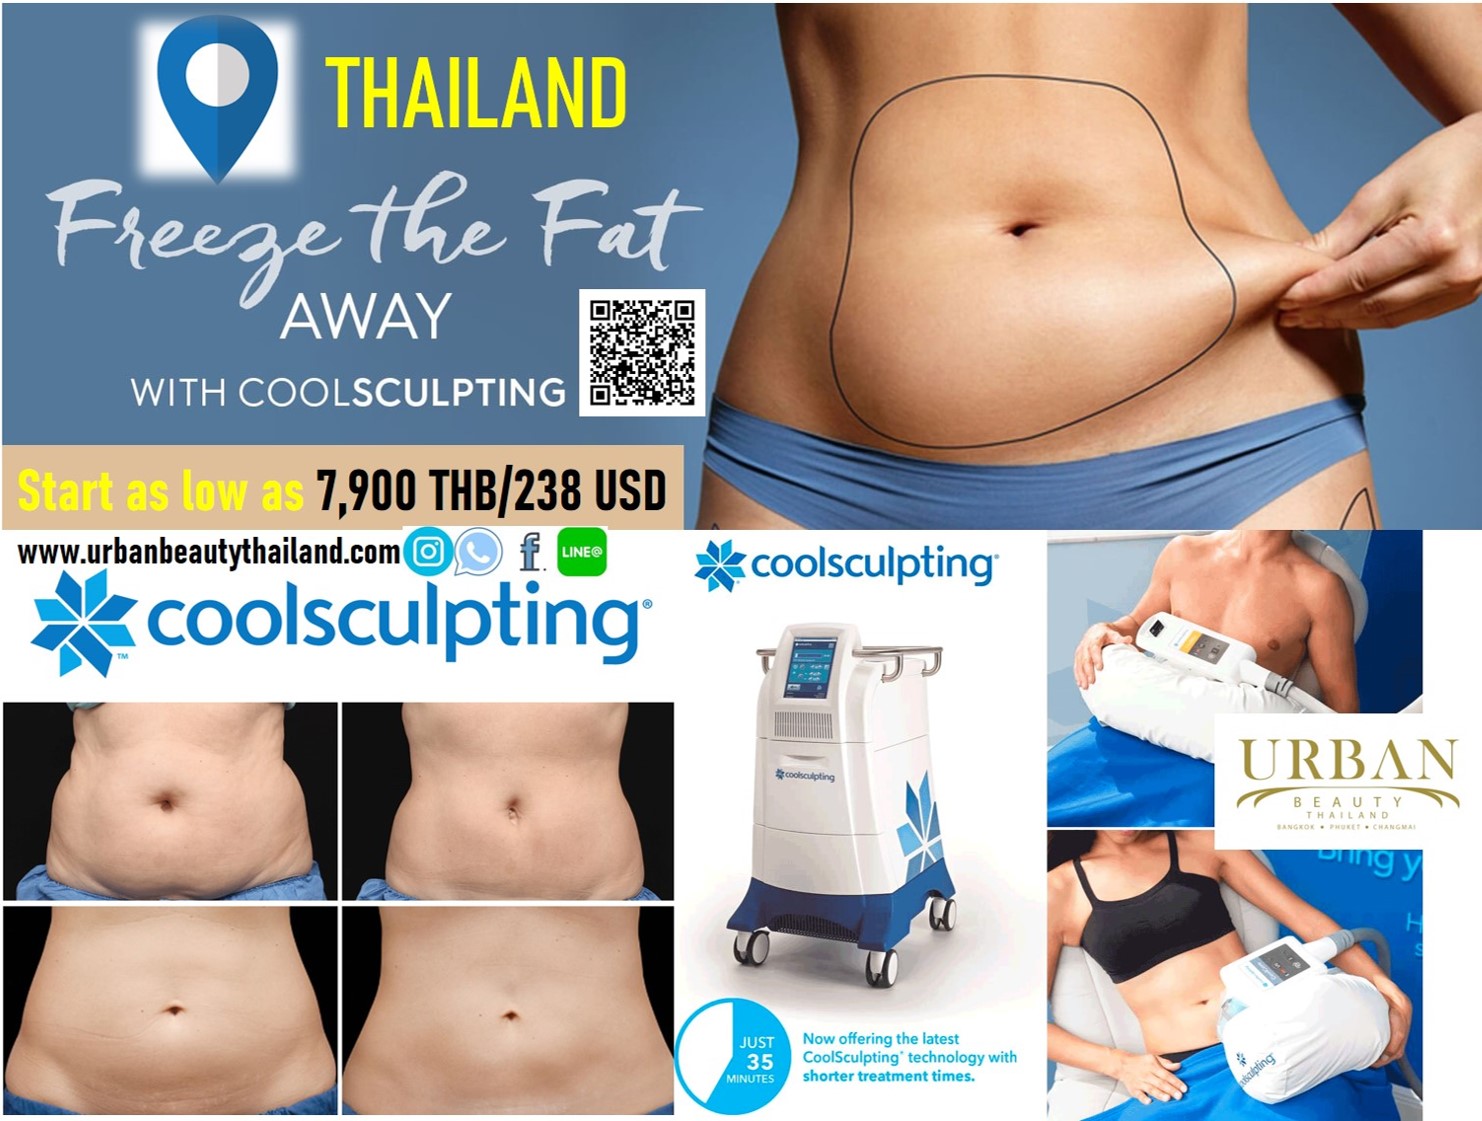 Is CoolSculpting Right for You? How Much Does Coolsculpting Cost